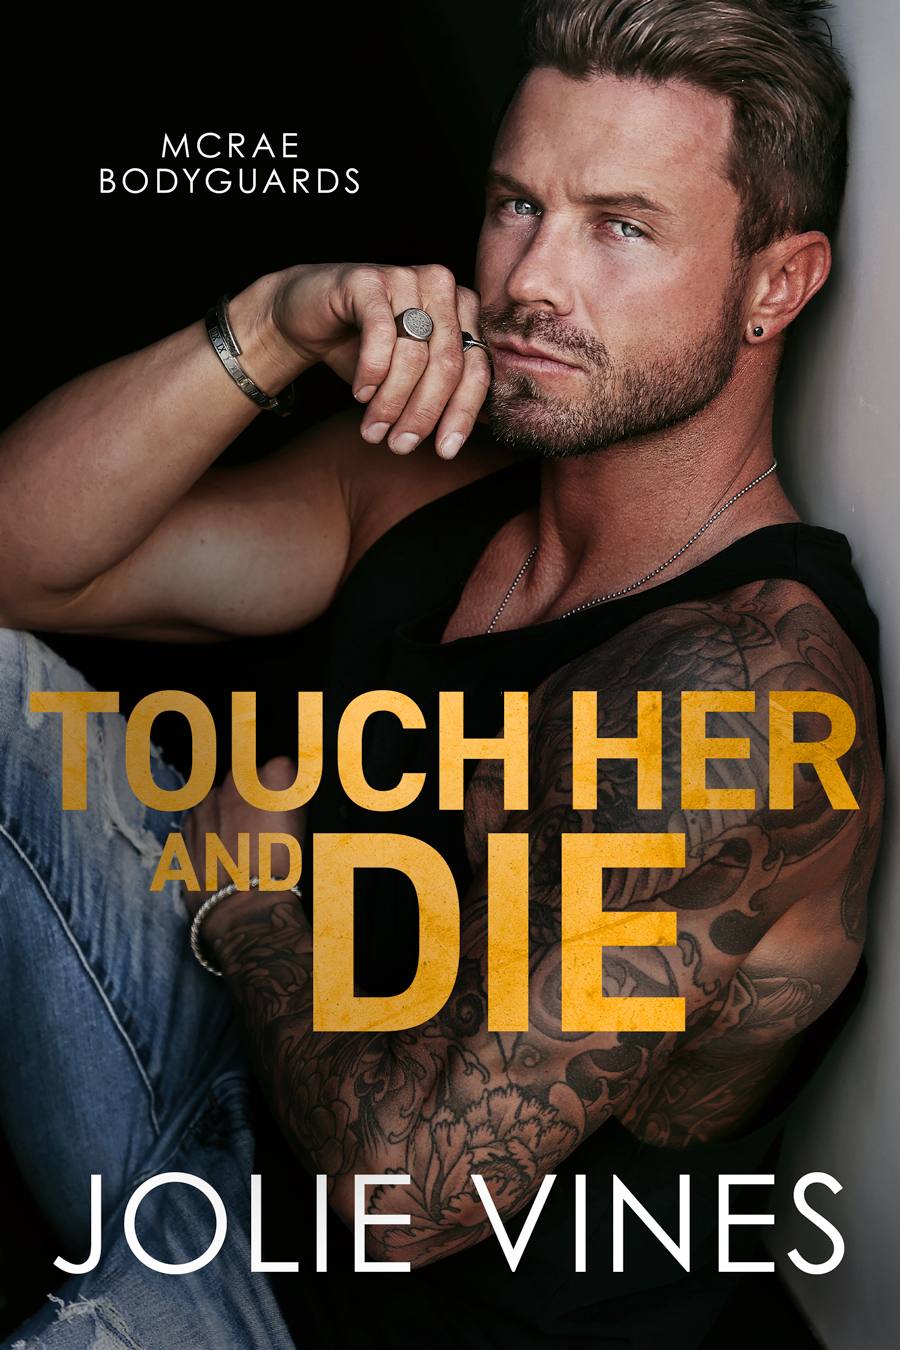 Touch Her and Die by Jolie Vines – McRae Bodyguards Series